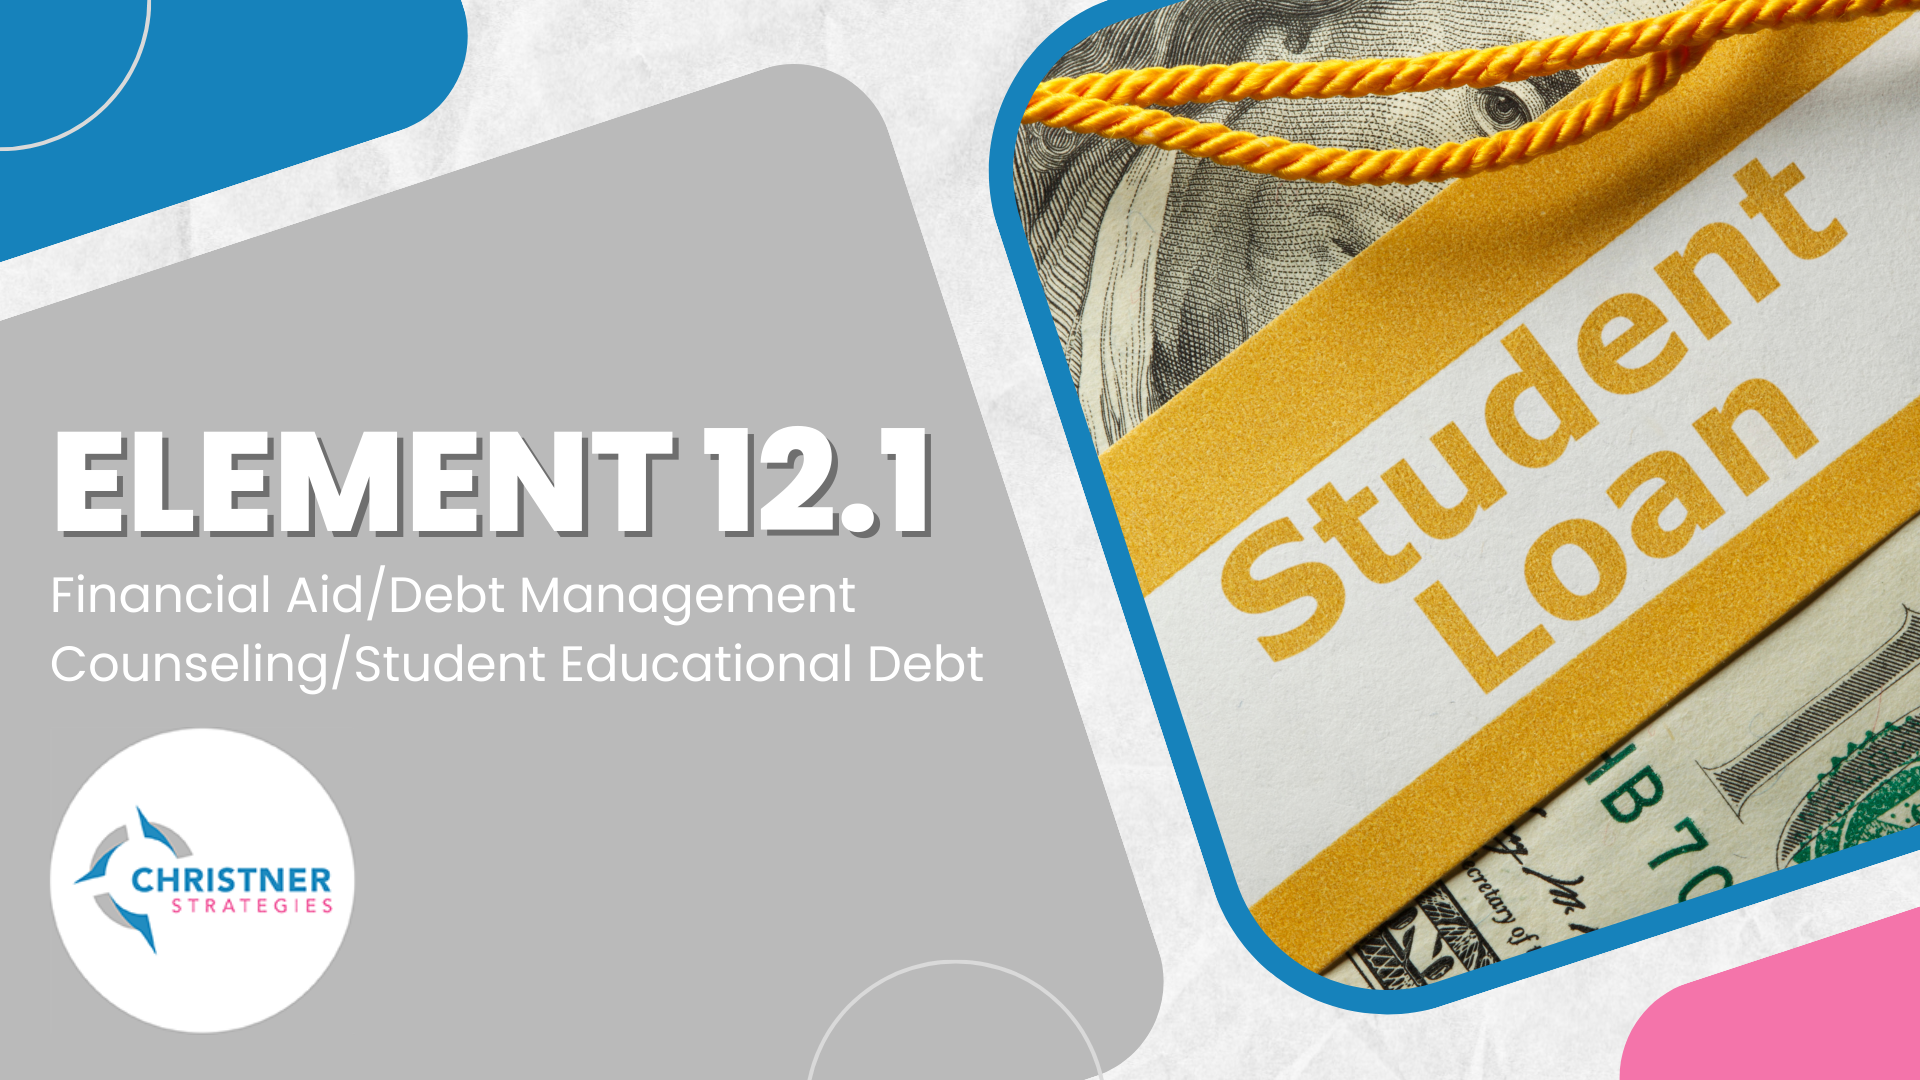 LCME Element 12.1 -Financial Aid/Debt Management Counseling/Student Educational Debt